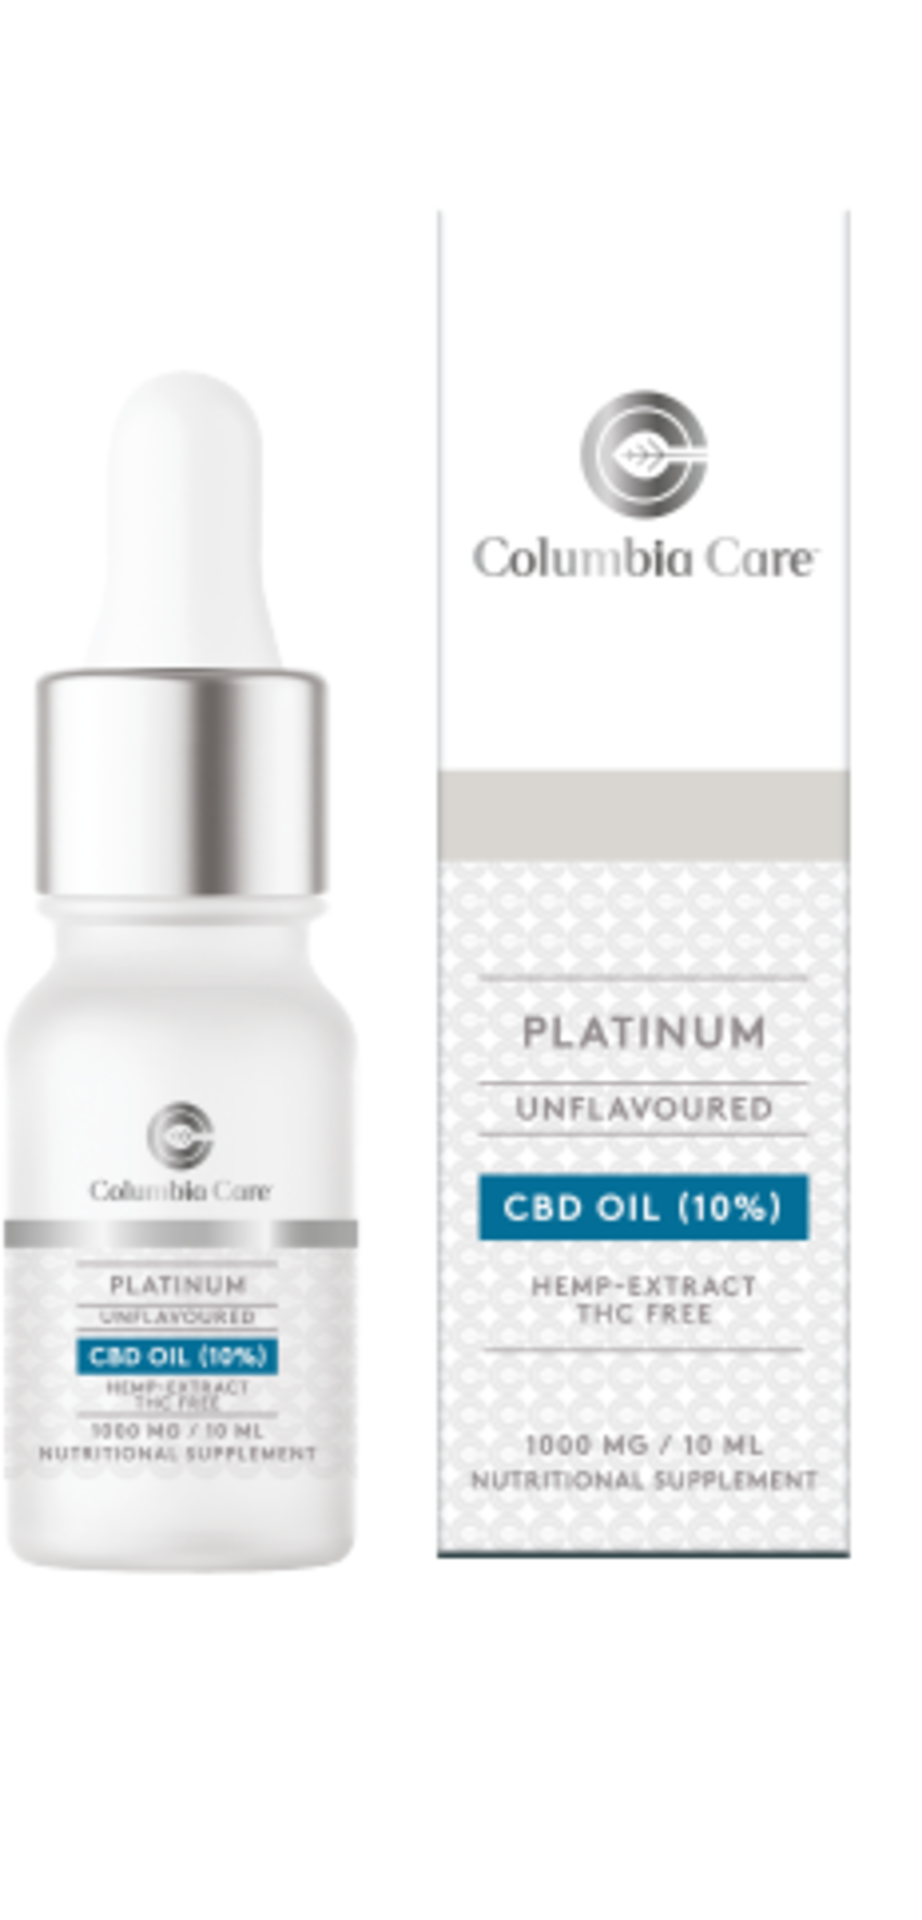 10 x Brand New Columbia Care Platinum Unflavoured Flavored Tincture 10ml 1000mg. Columbia Care, a